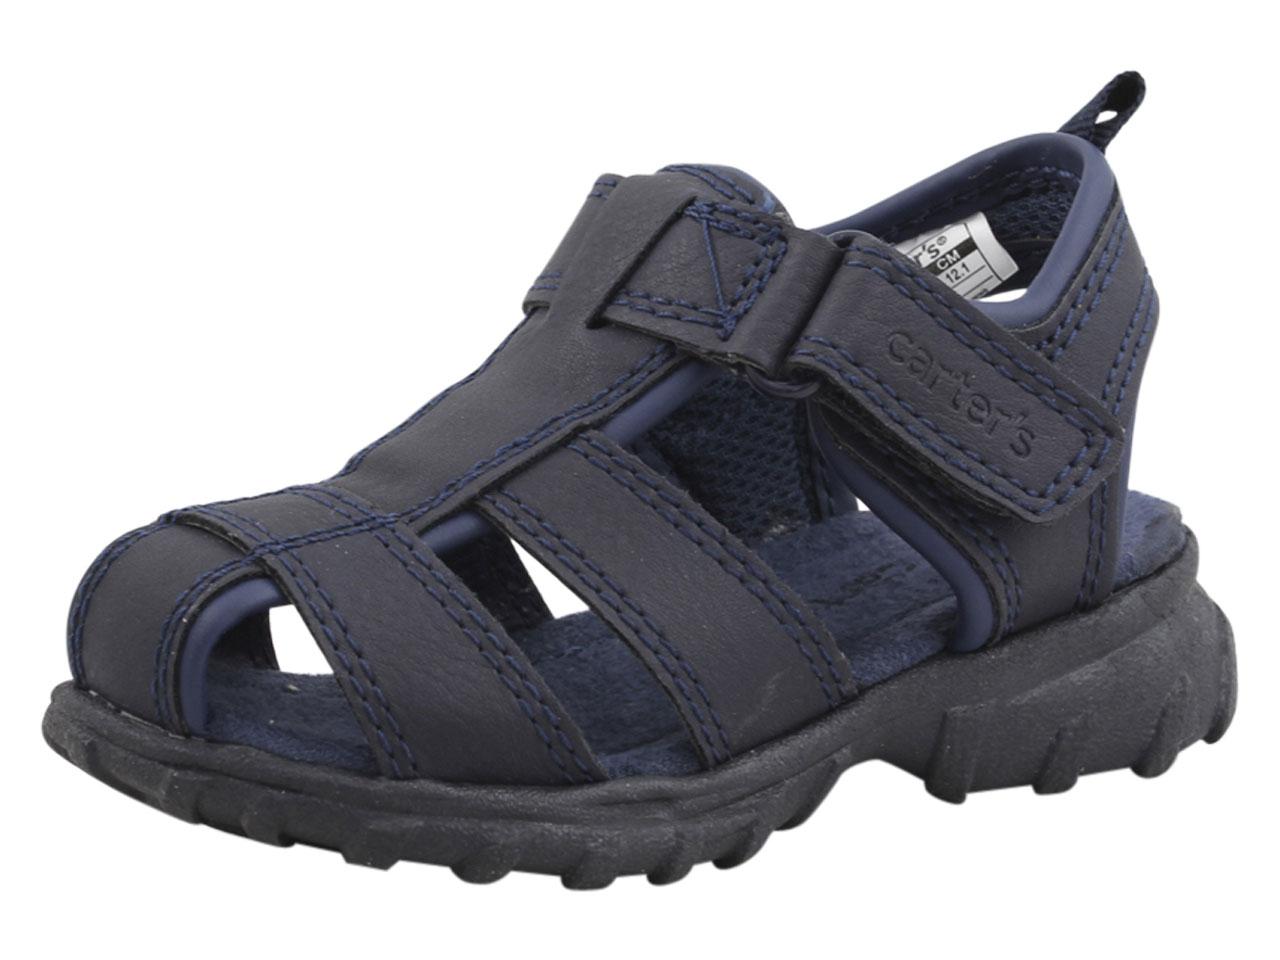 Carter's Toddler/Little Boy's Xtreme Fisherman Sandals Shoes